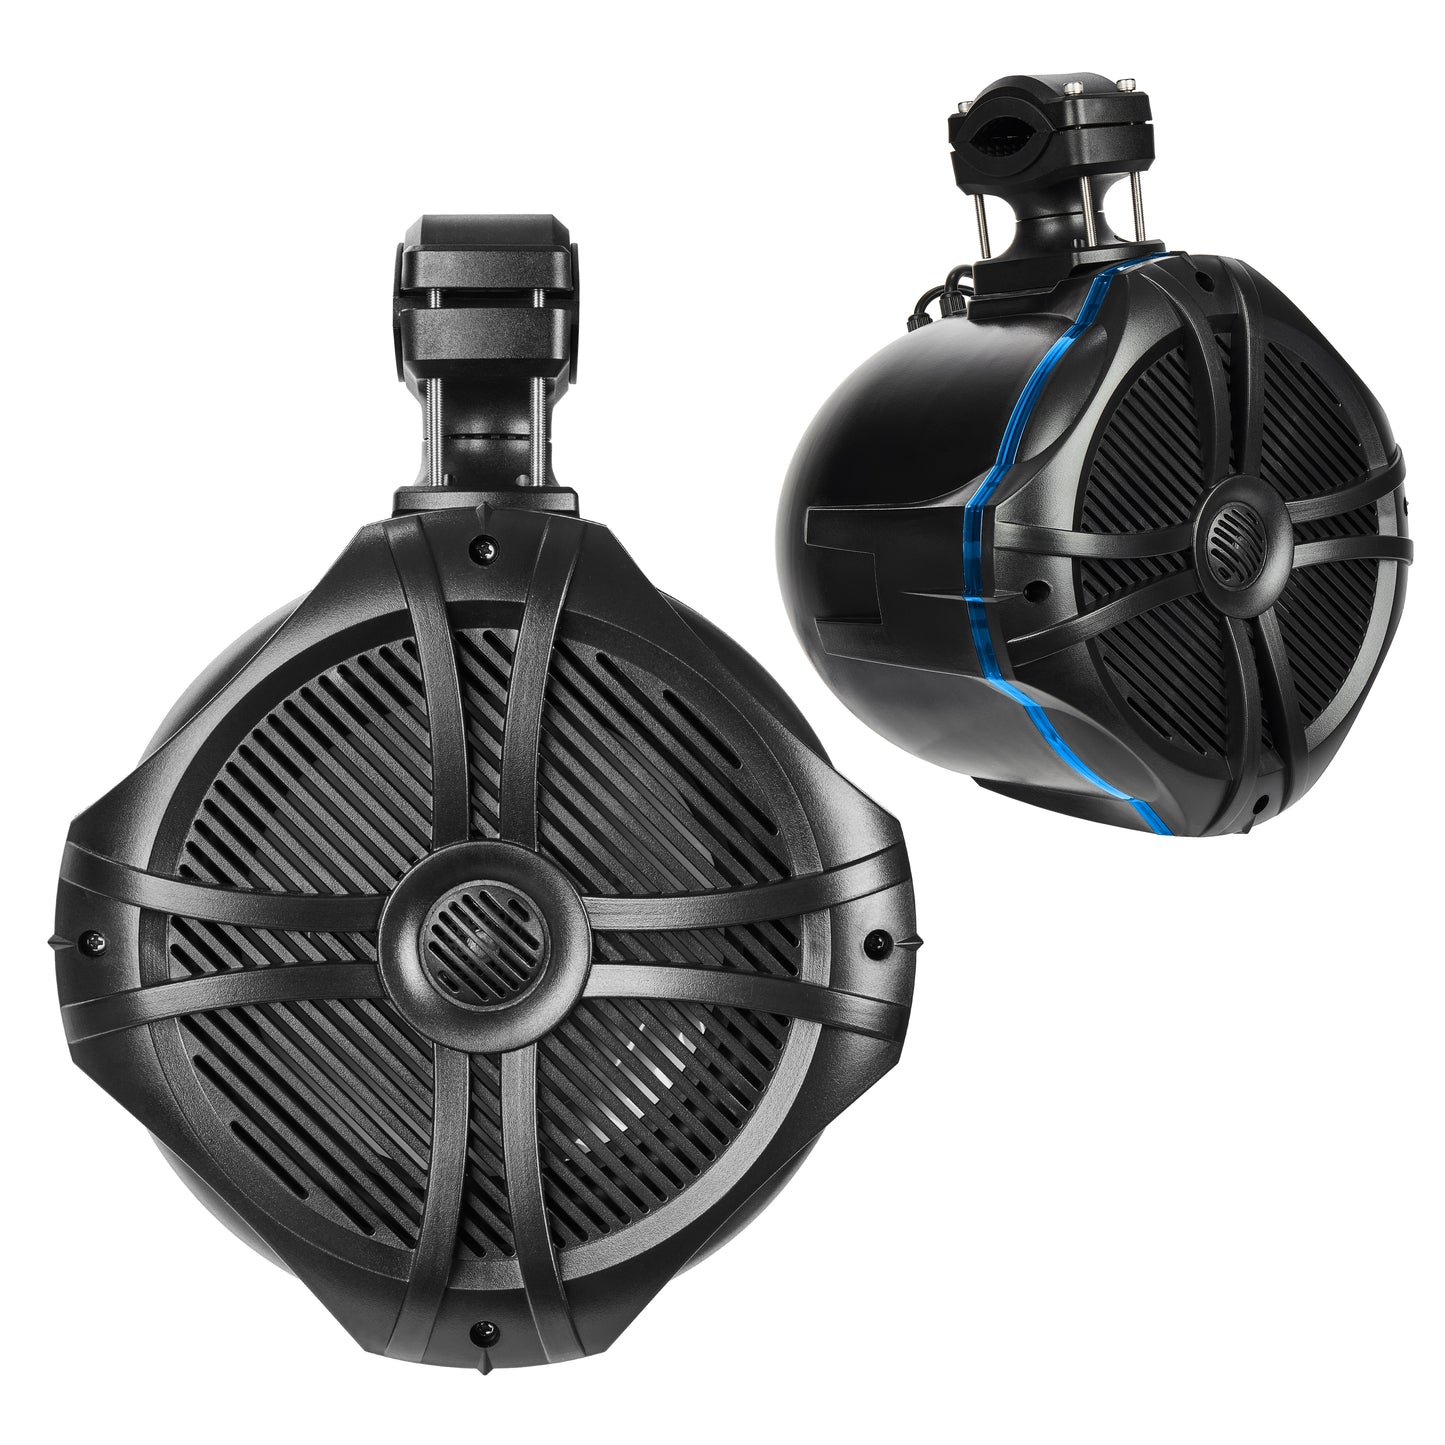 BT8RGB 600W Peak (300W RMS) 8" Marine Tower Speakers with Multi-Color LED Lighting and Remote (Black)